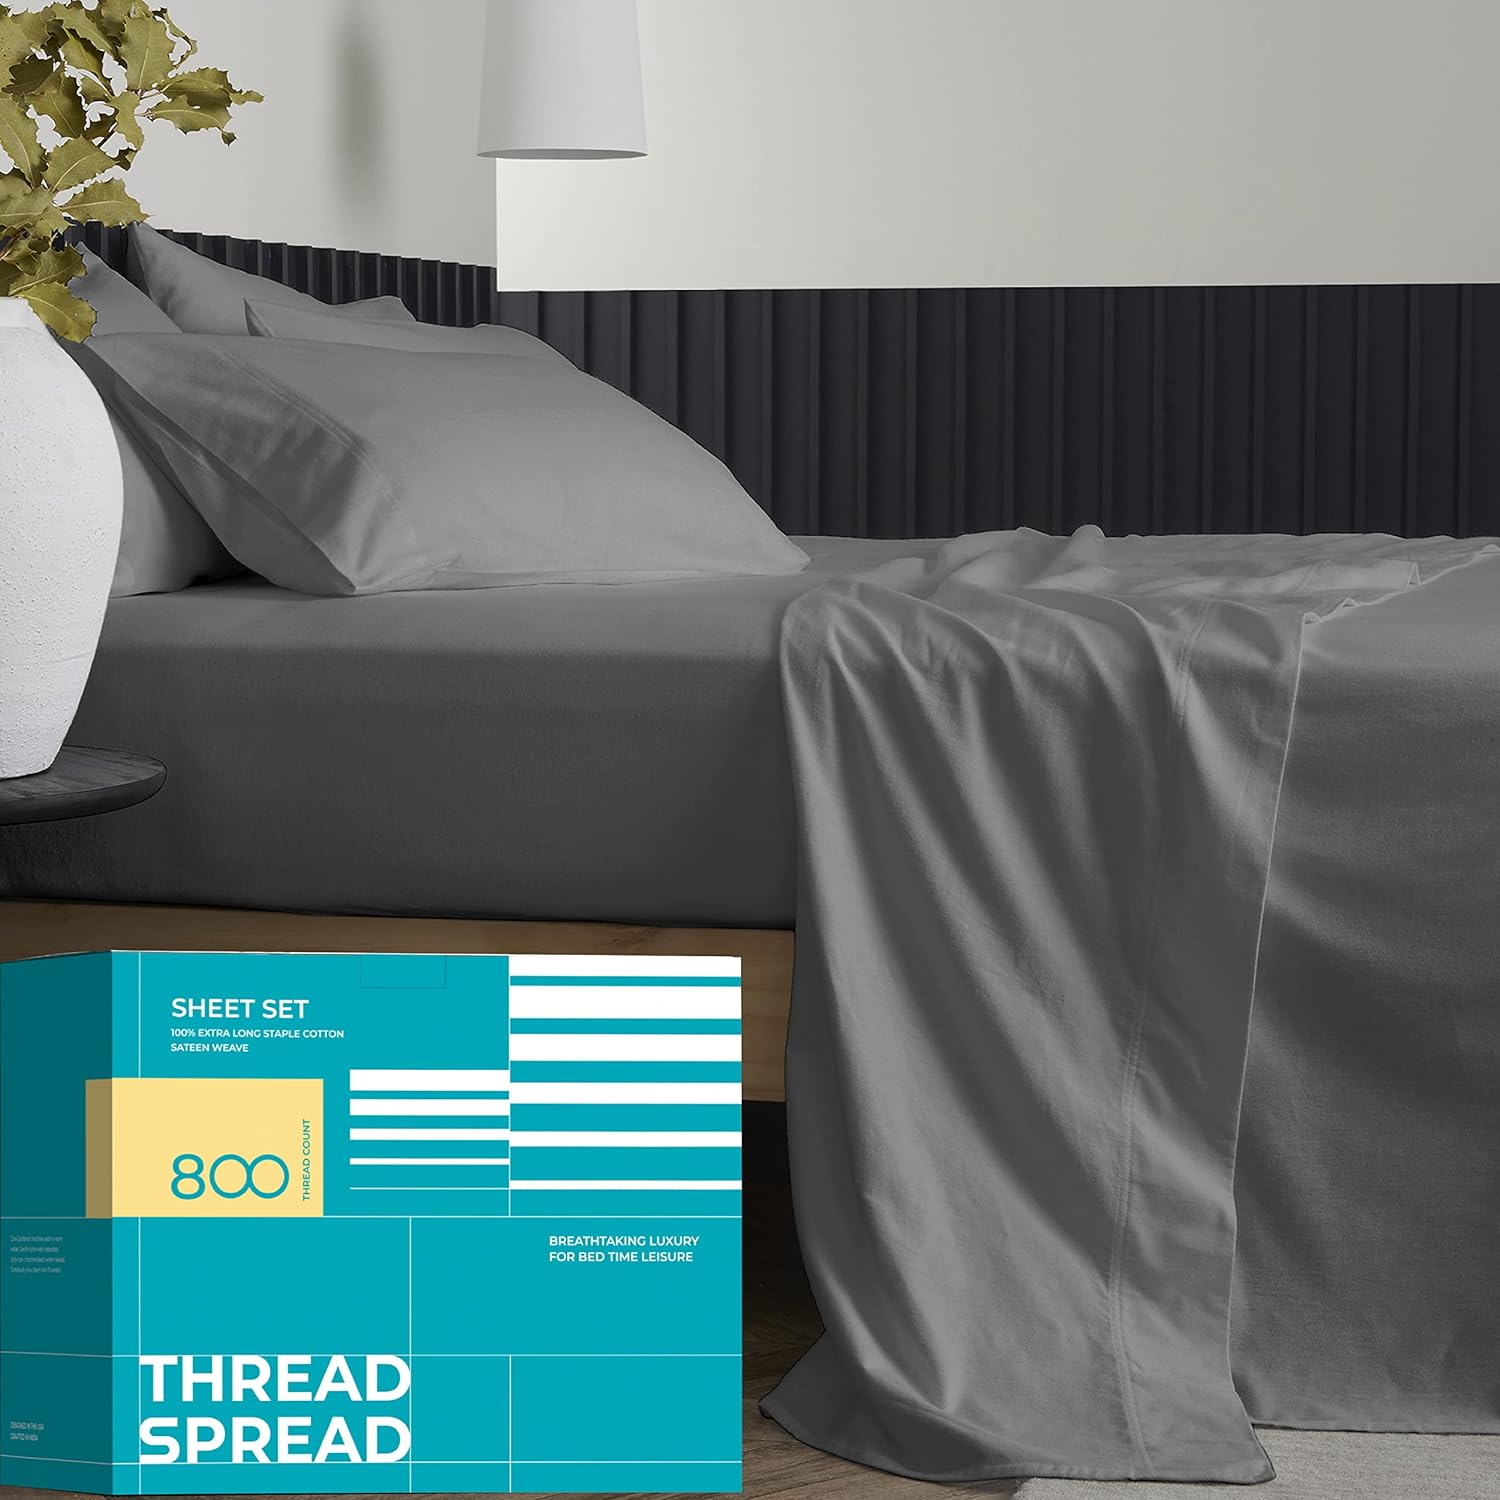 THREAD SPREAD 100% Egyptian Cotton California King Bed Sheets - 800 TC 4Pc Dark Grey Bed Sheet for Calking Size Bed, Sateen Weave Deep Pocket Luxury Hotel Sheets, Extra Soft Cooling Bedding Sheets